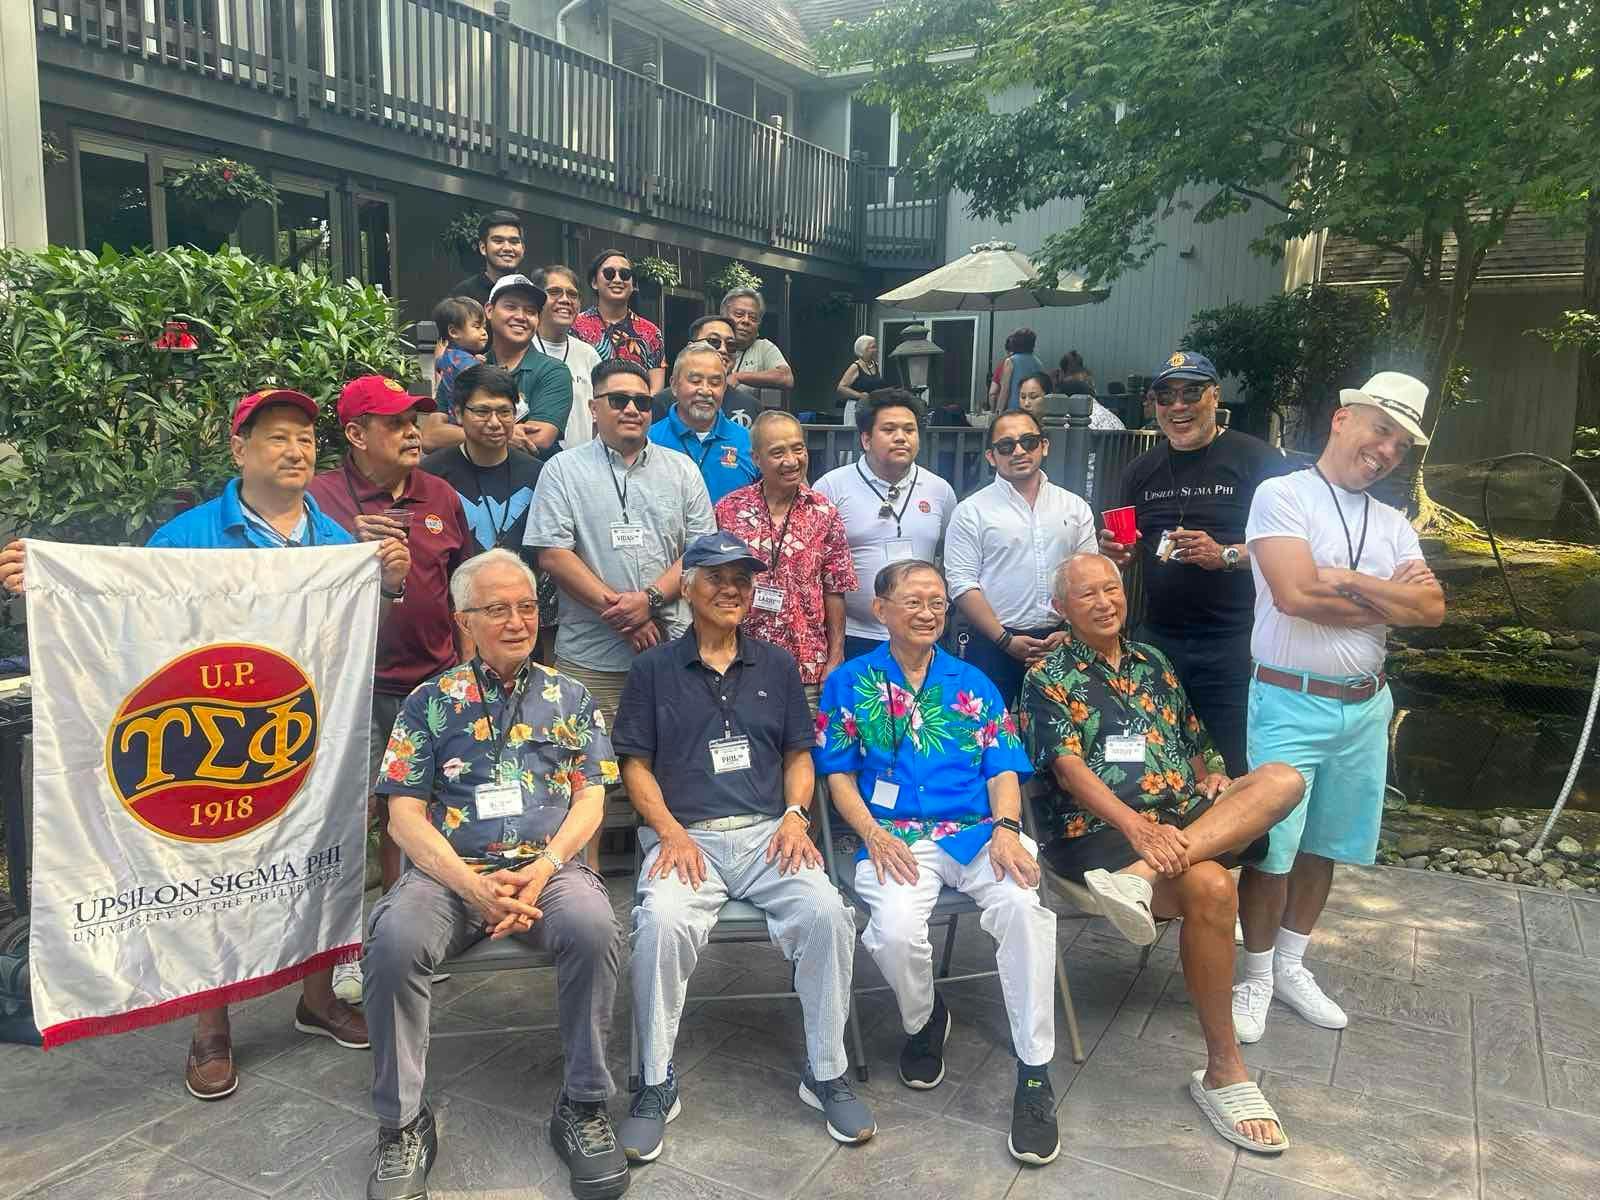 Northeast Chapter Summer Picnic in Saddle River, New Jersey, Aug. 5, 2023